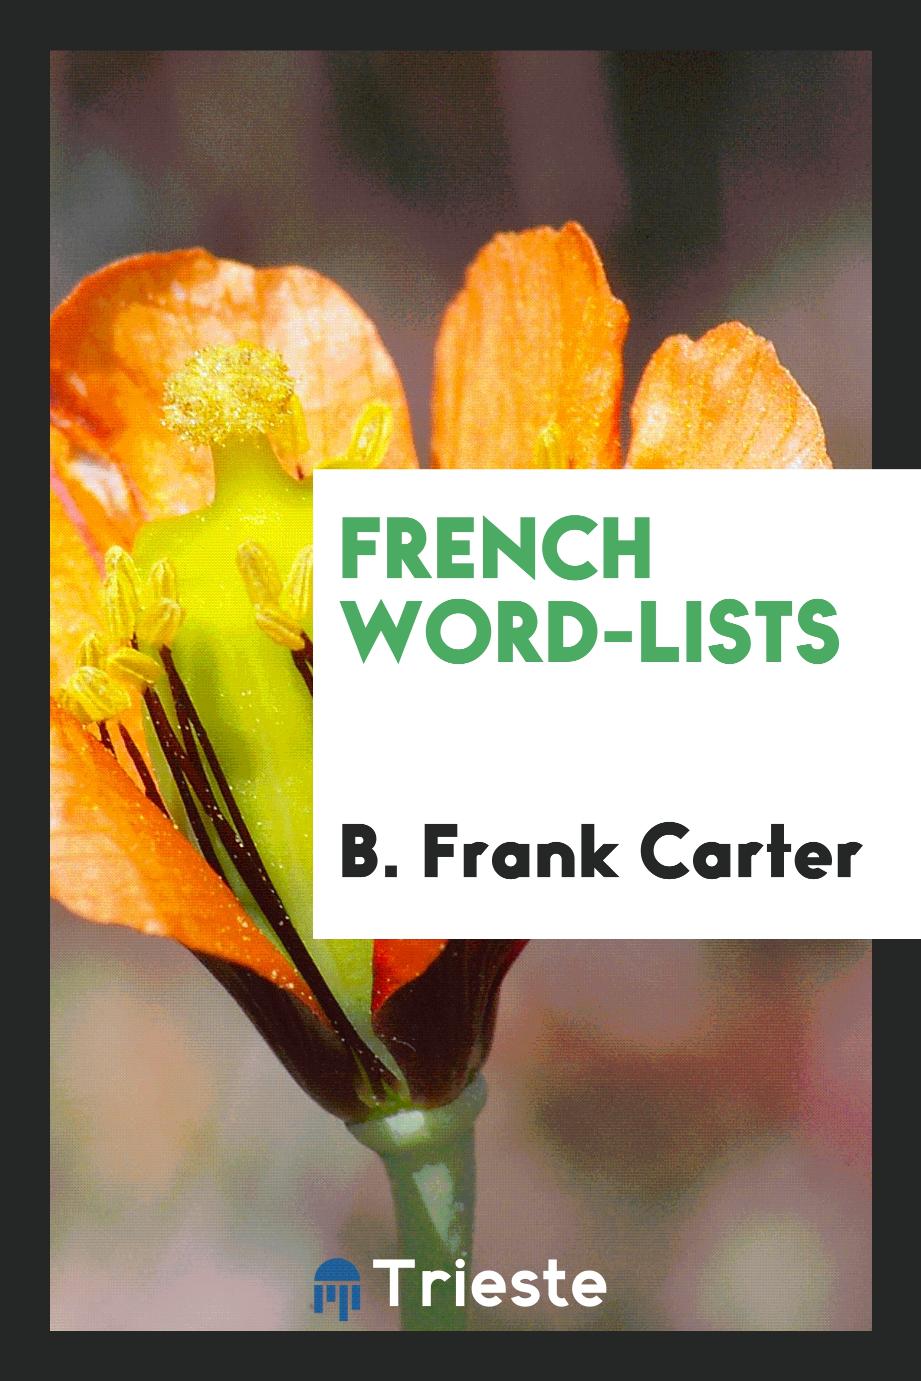 French Word-lists